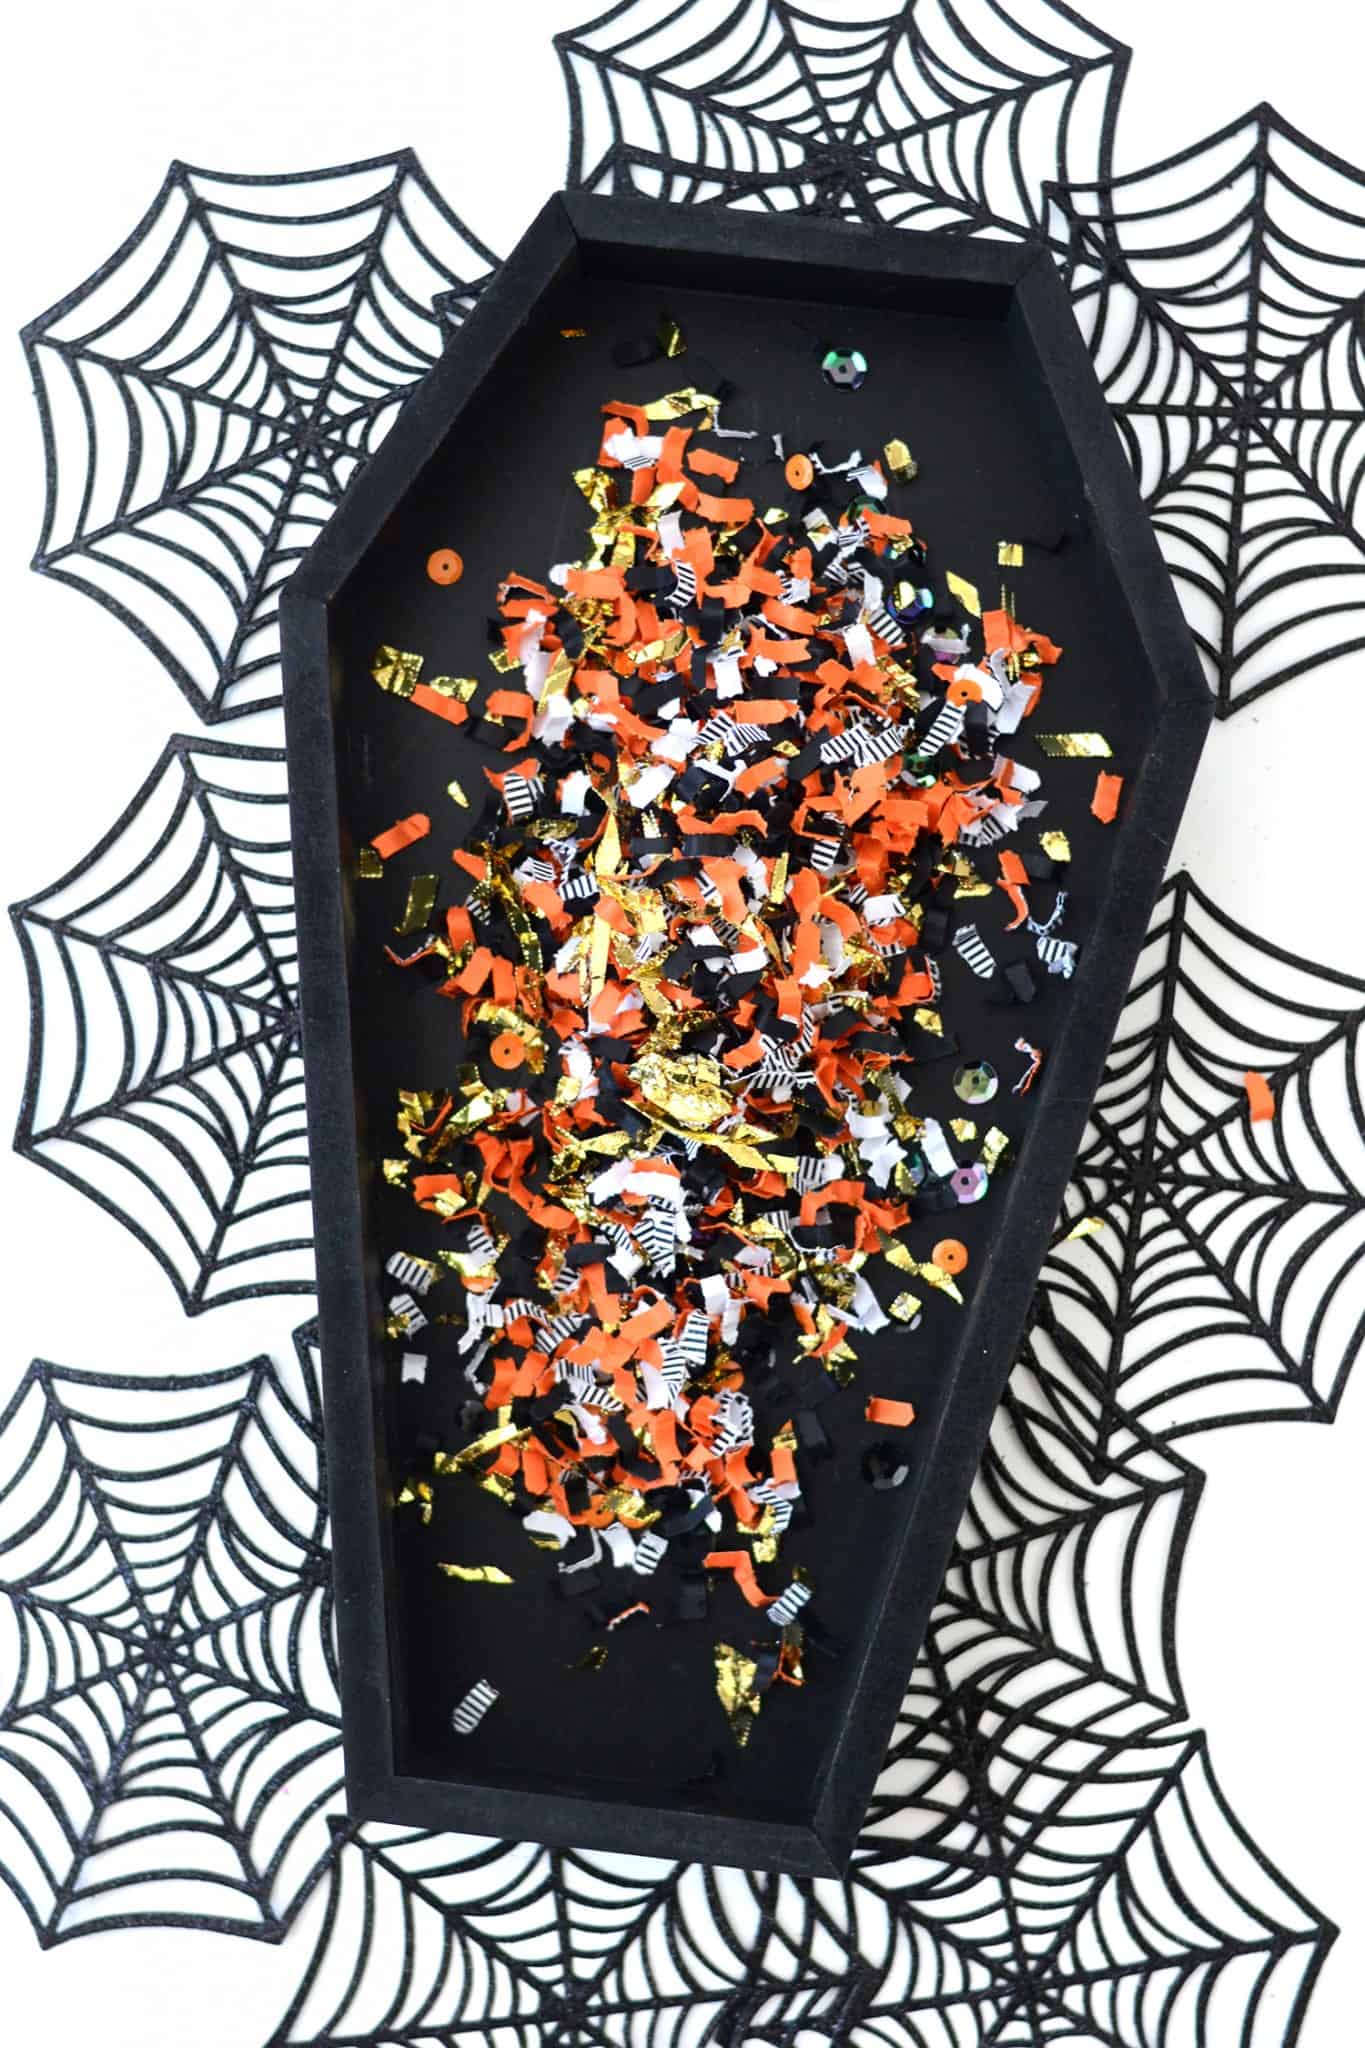 Black wood coffin sprinkled with confetti